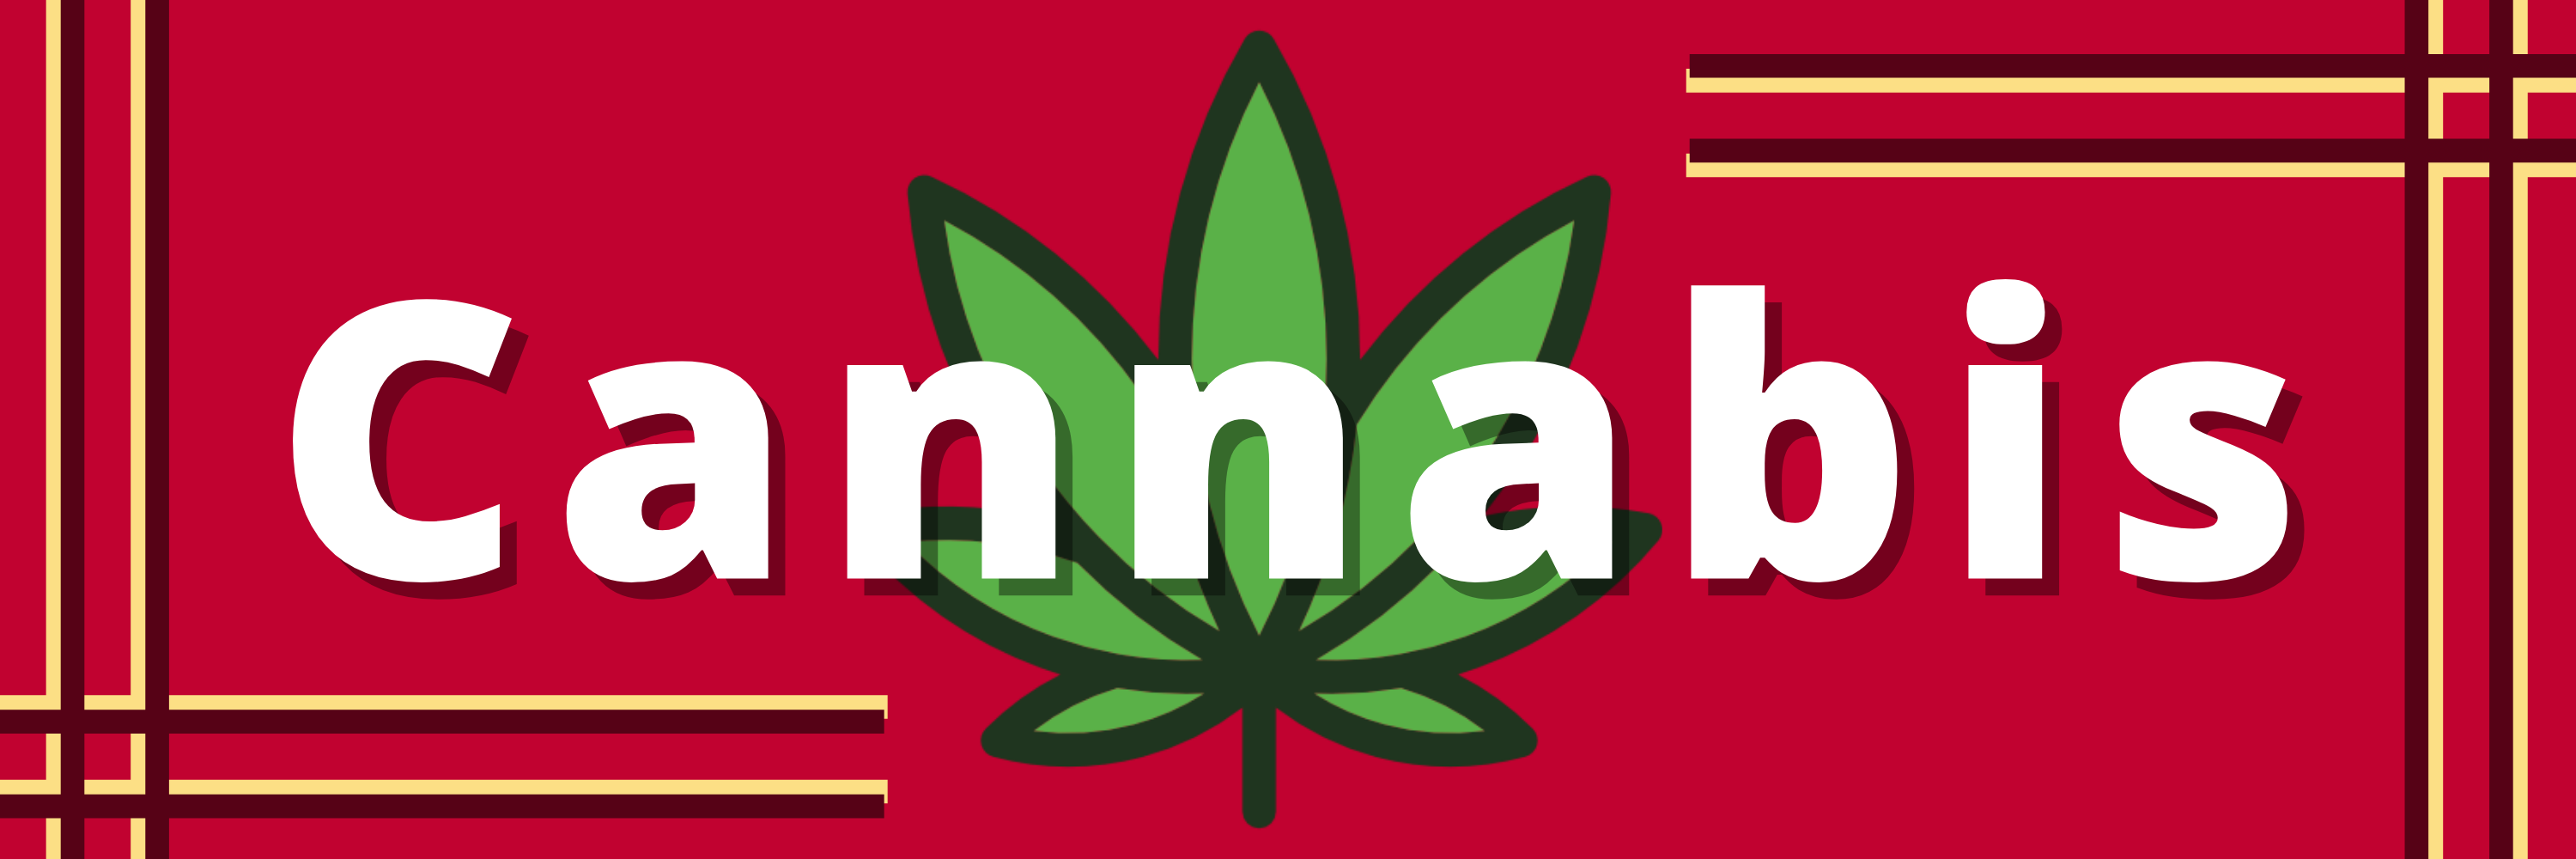 Cannabis leaf with red background